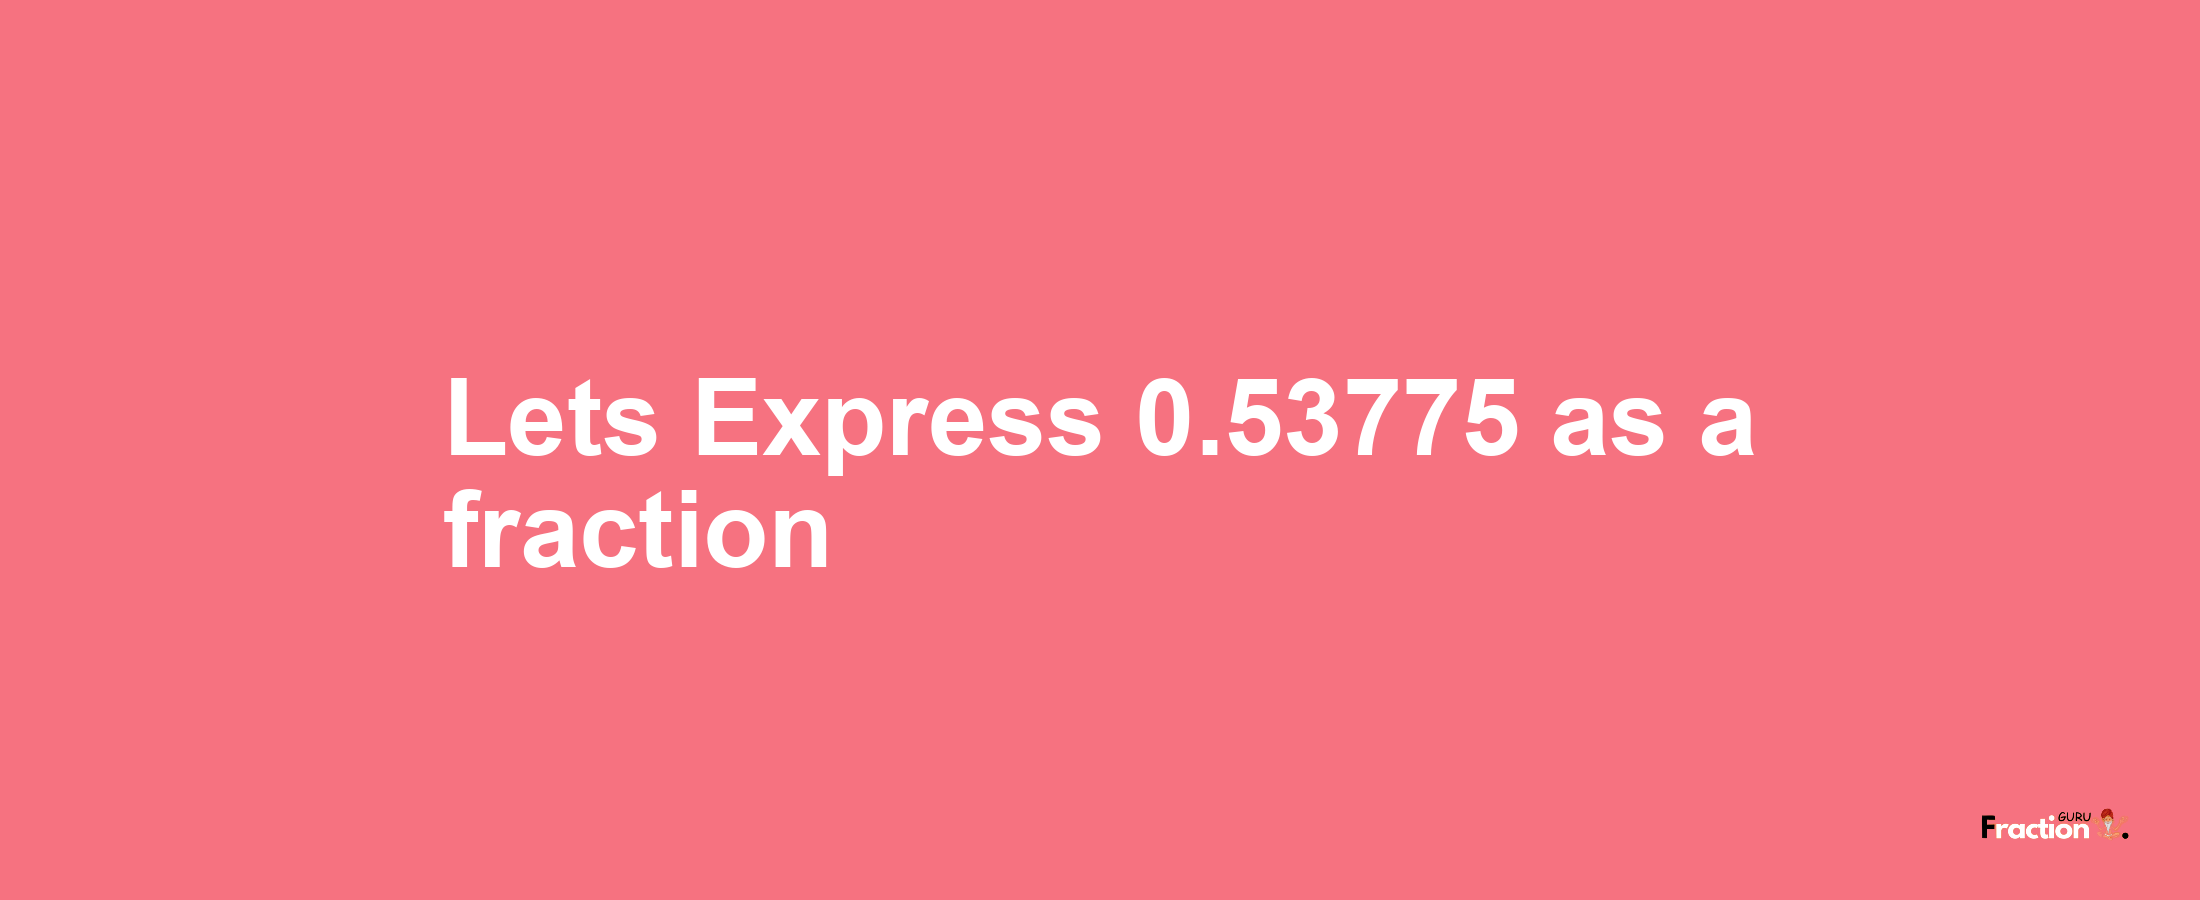 Lets Express 0.53775 as afraction